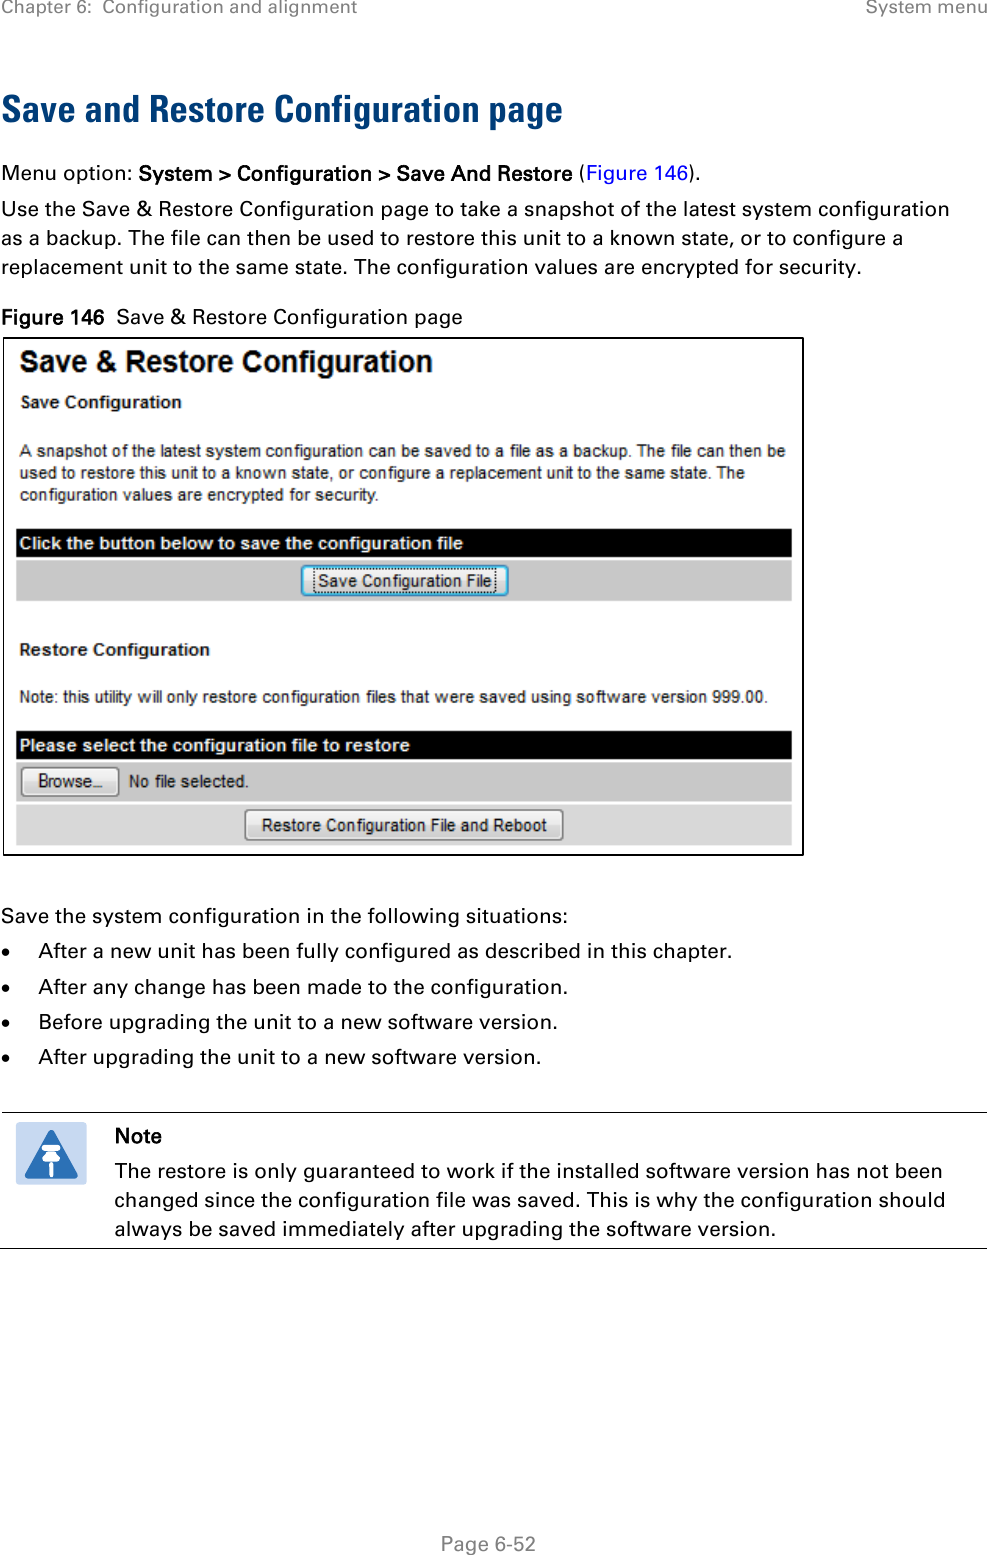 Chapter 6:  Configuration and alignment System menu  Save and Restore Configuration page Menu option: System &gt; Configuration &gt; Save And Restore (Figure 146). Use the Save &amp; Restore Configuration page to take a snapshot of the latest system configuration as a backup. The file can then be used to restore this unit to a known state, or to configure a replacement unit to the same state. The configuration values are encrypted for security. Figure 146  Save &amp; Restore Configuration page   Save the system configuration in the following situations: • After a new unit has been fully configured as described in this chapter. • After any change has been made to the configuration. • Before upgrading the unit to a new software version. • After upgrading the unit to a new software version.   Note The restore is only guaranteed to work if the installed software version has not been changed since the configuration file was saved. This is why the configuration should always be saved immediately after upgrading the software version.   Page 6-52 